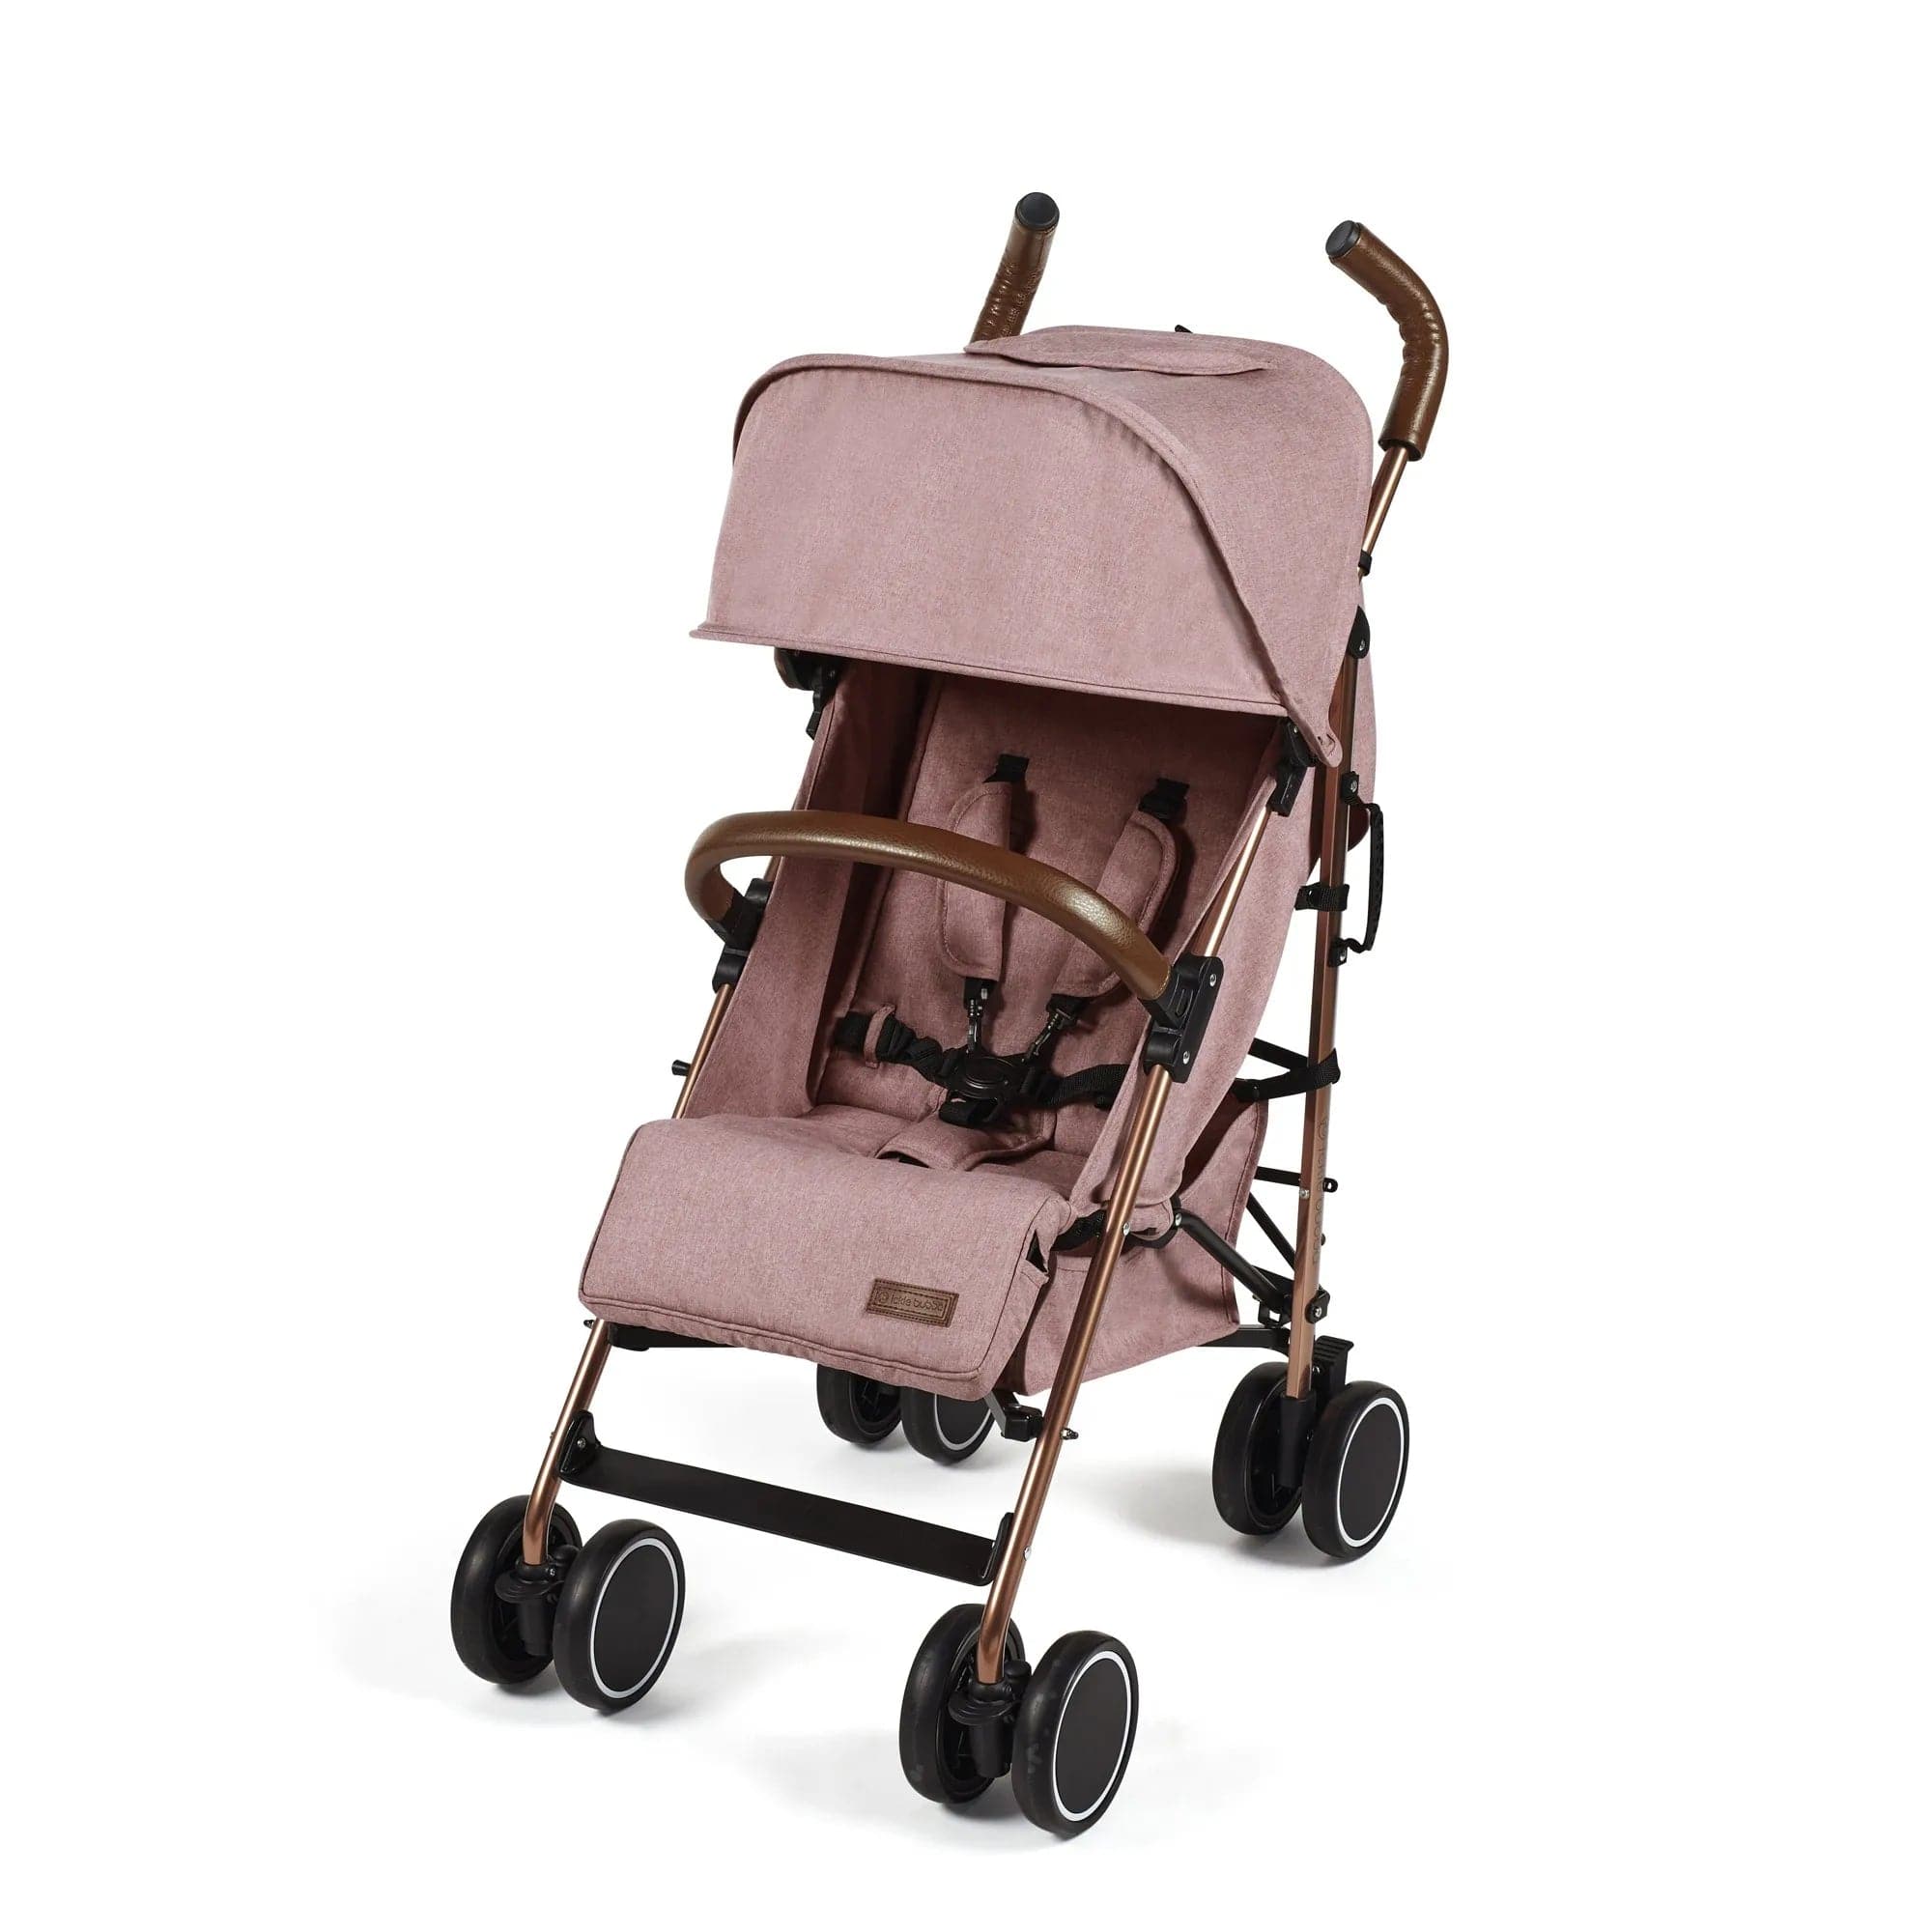 Ickle bubba Discovery Prime Stroller -  Rose Gold / Dusky Pink   